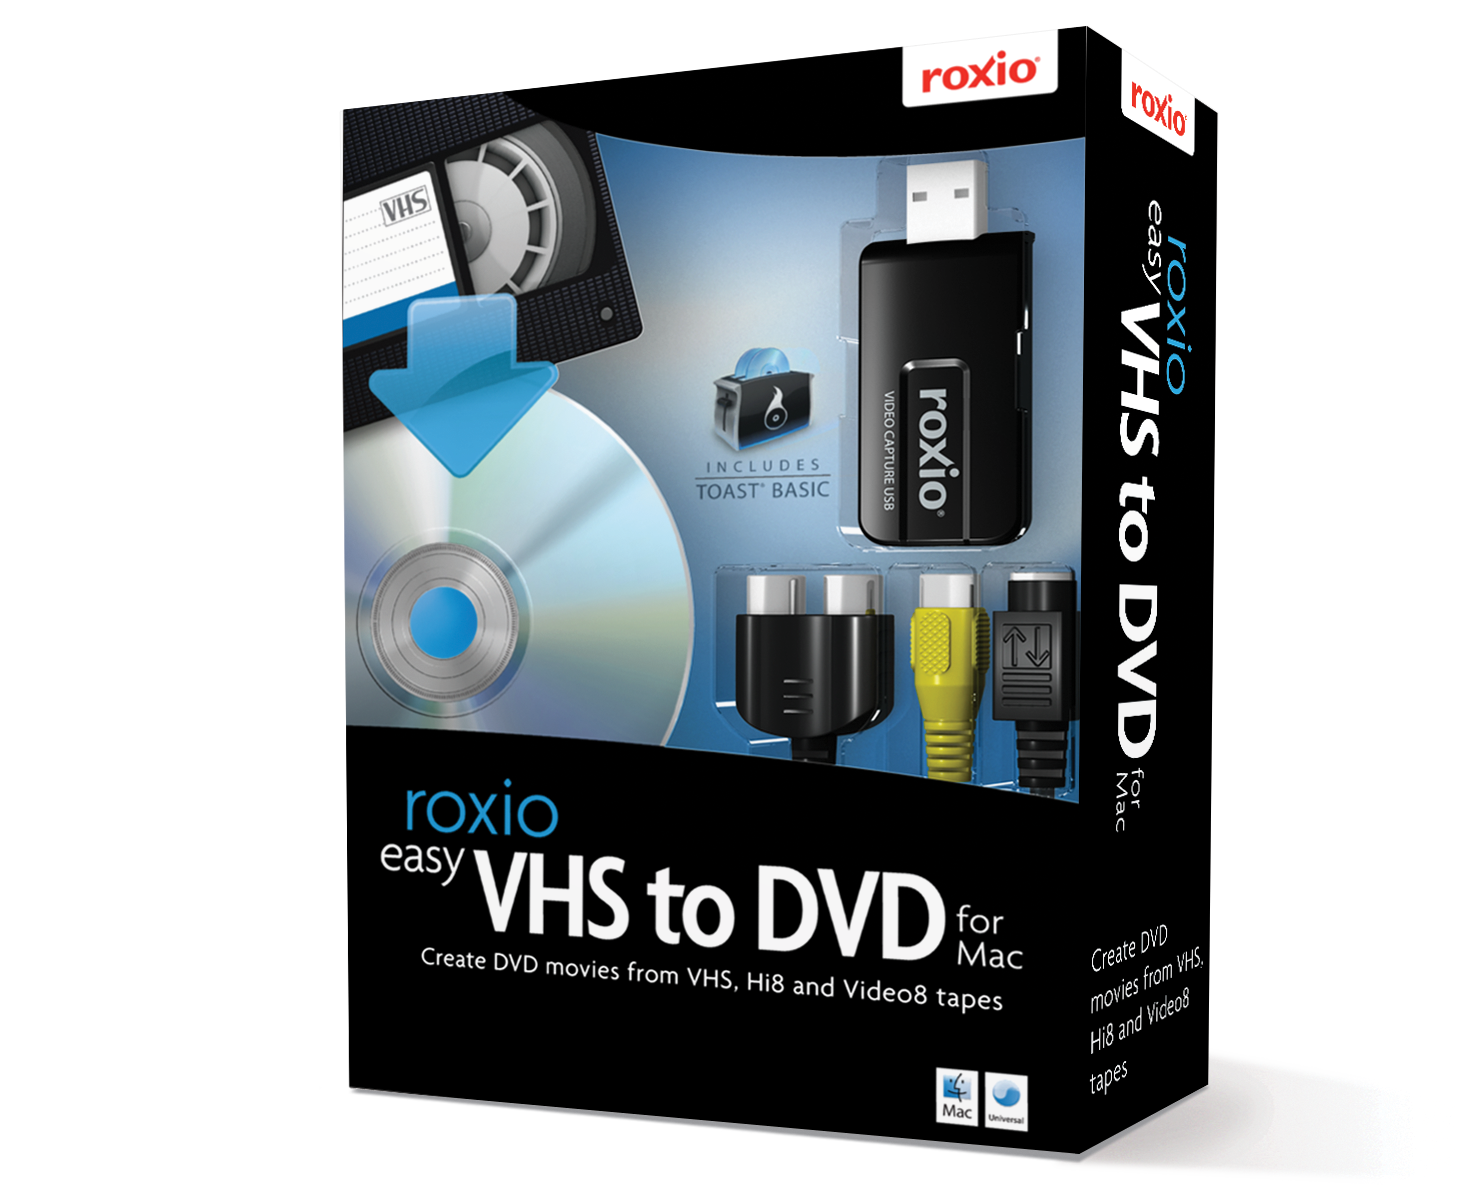 roxio vhs to dvd software download